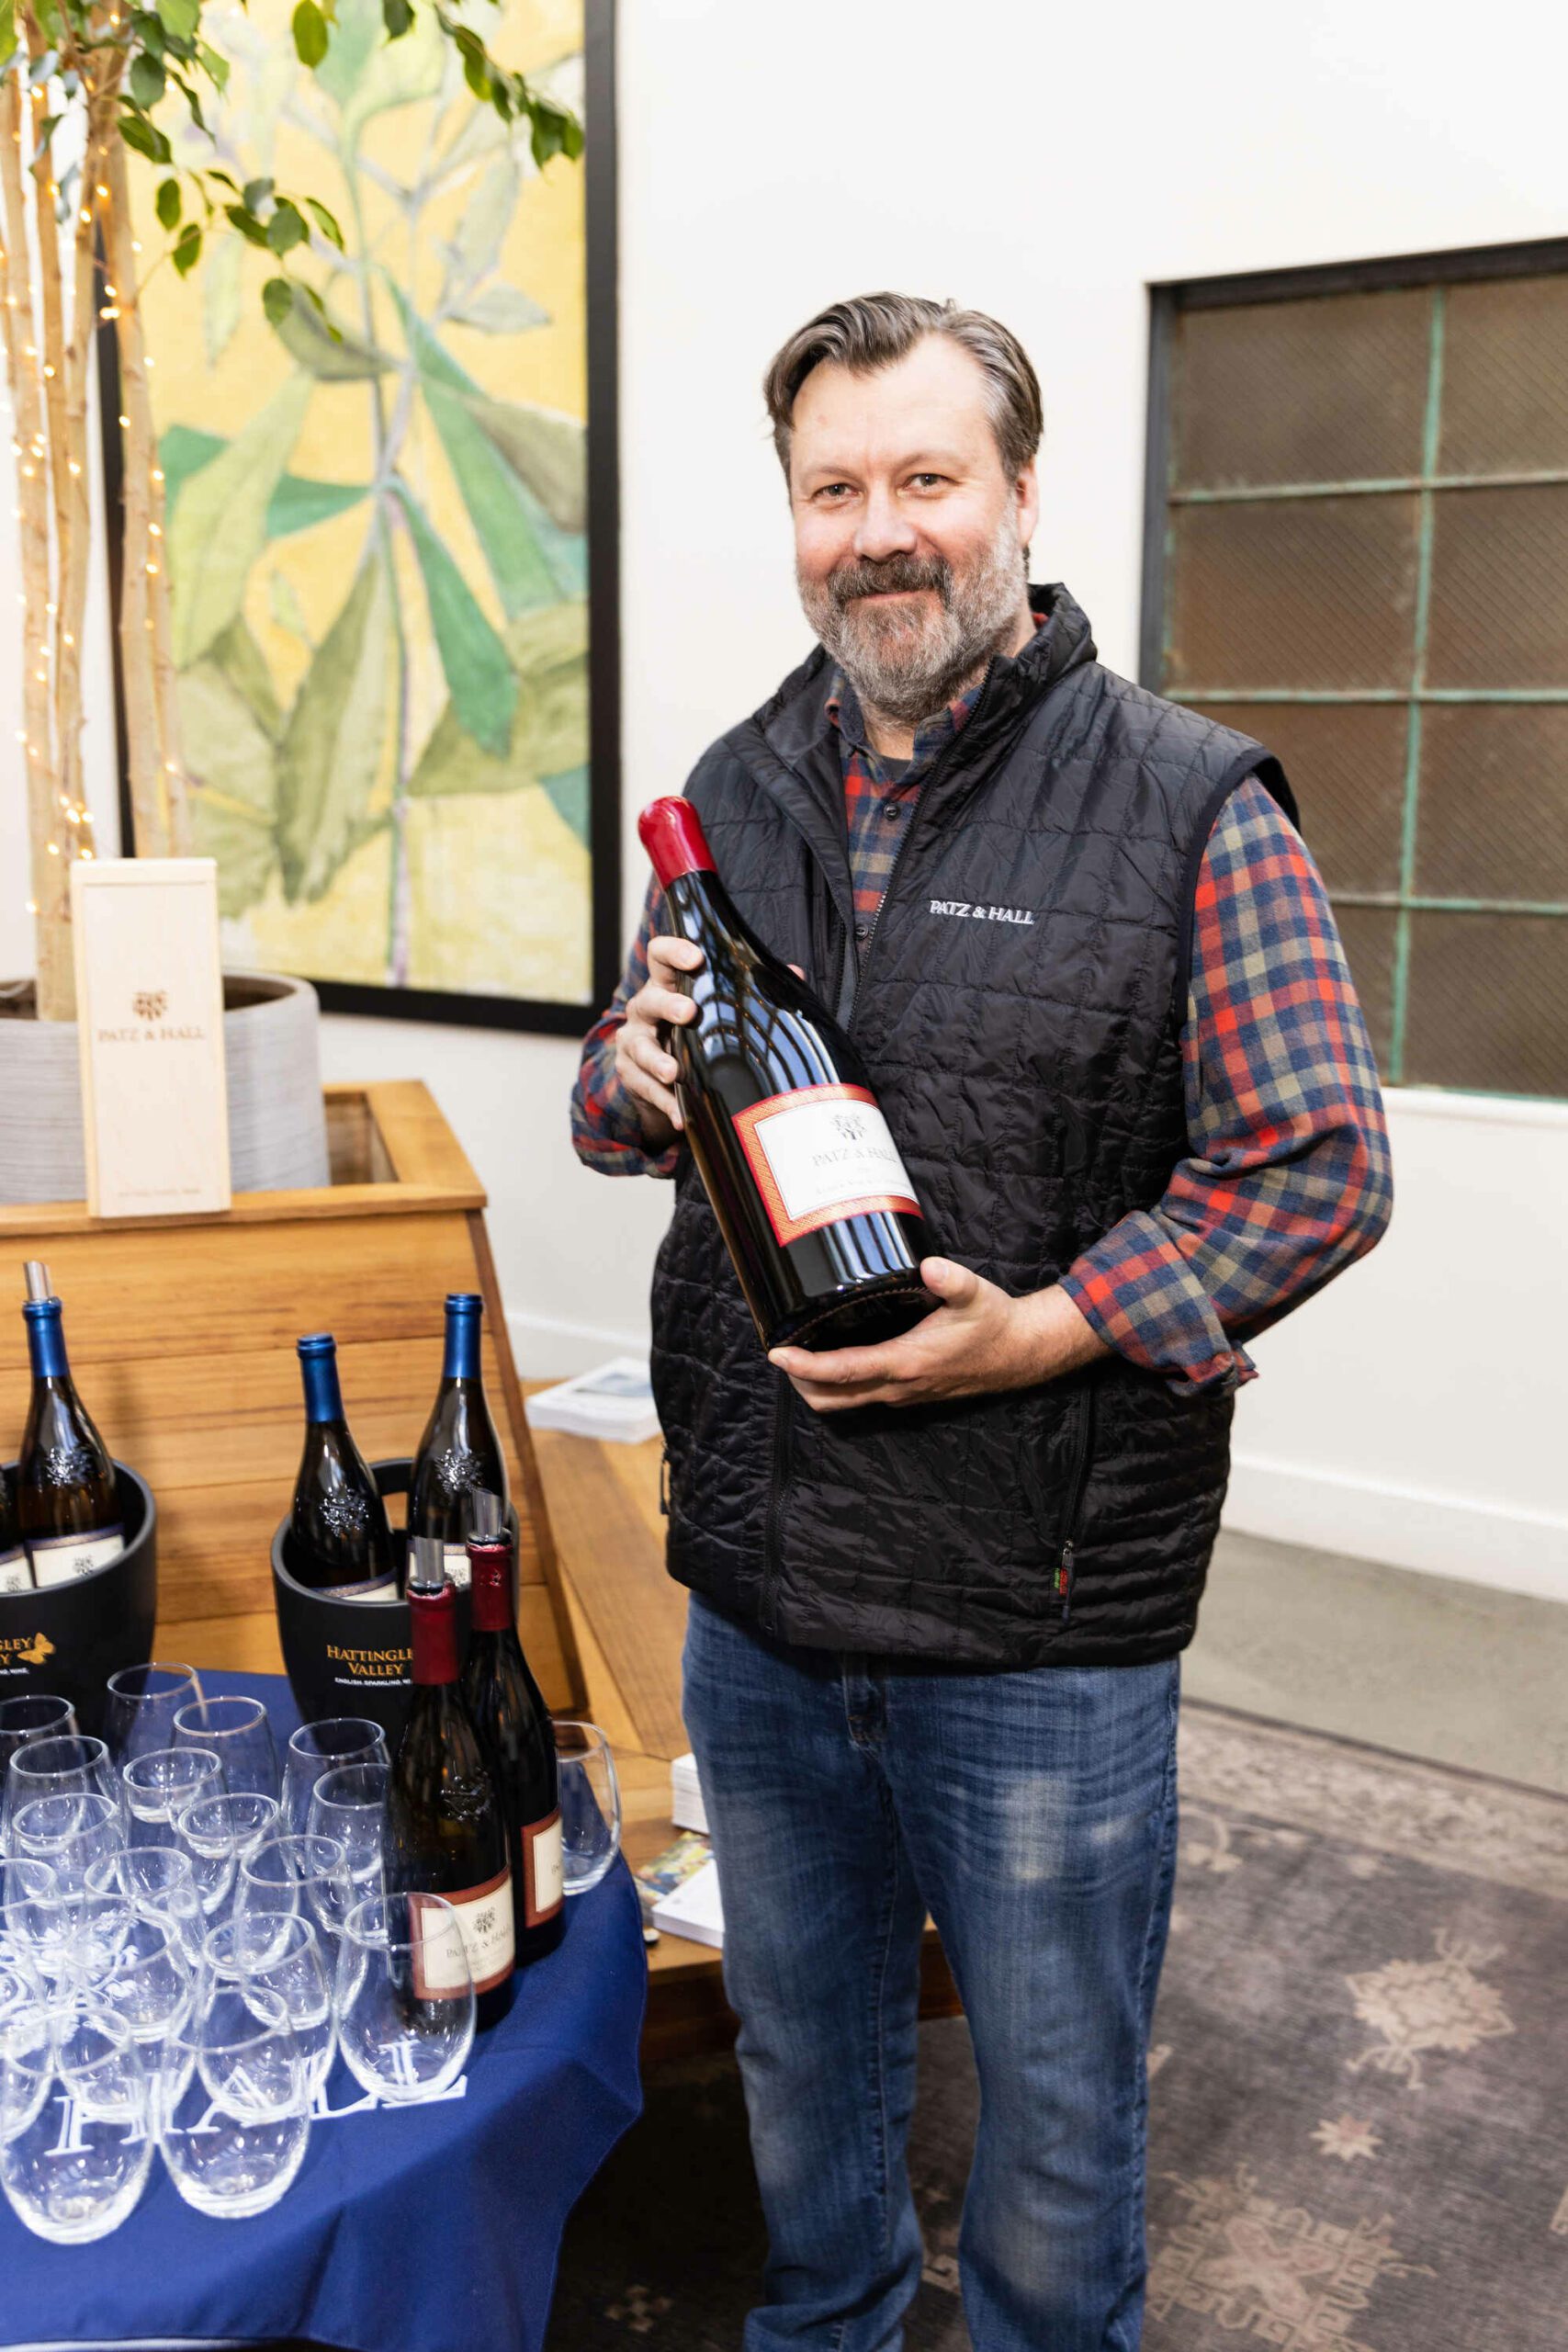 Man with bottles of Patz and Hall wines